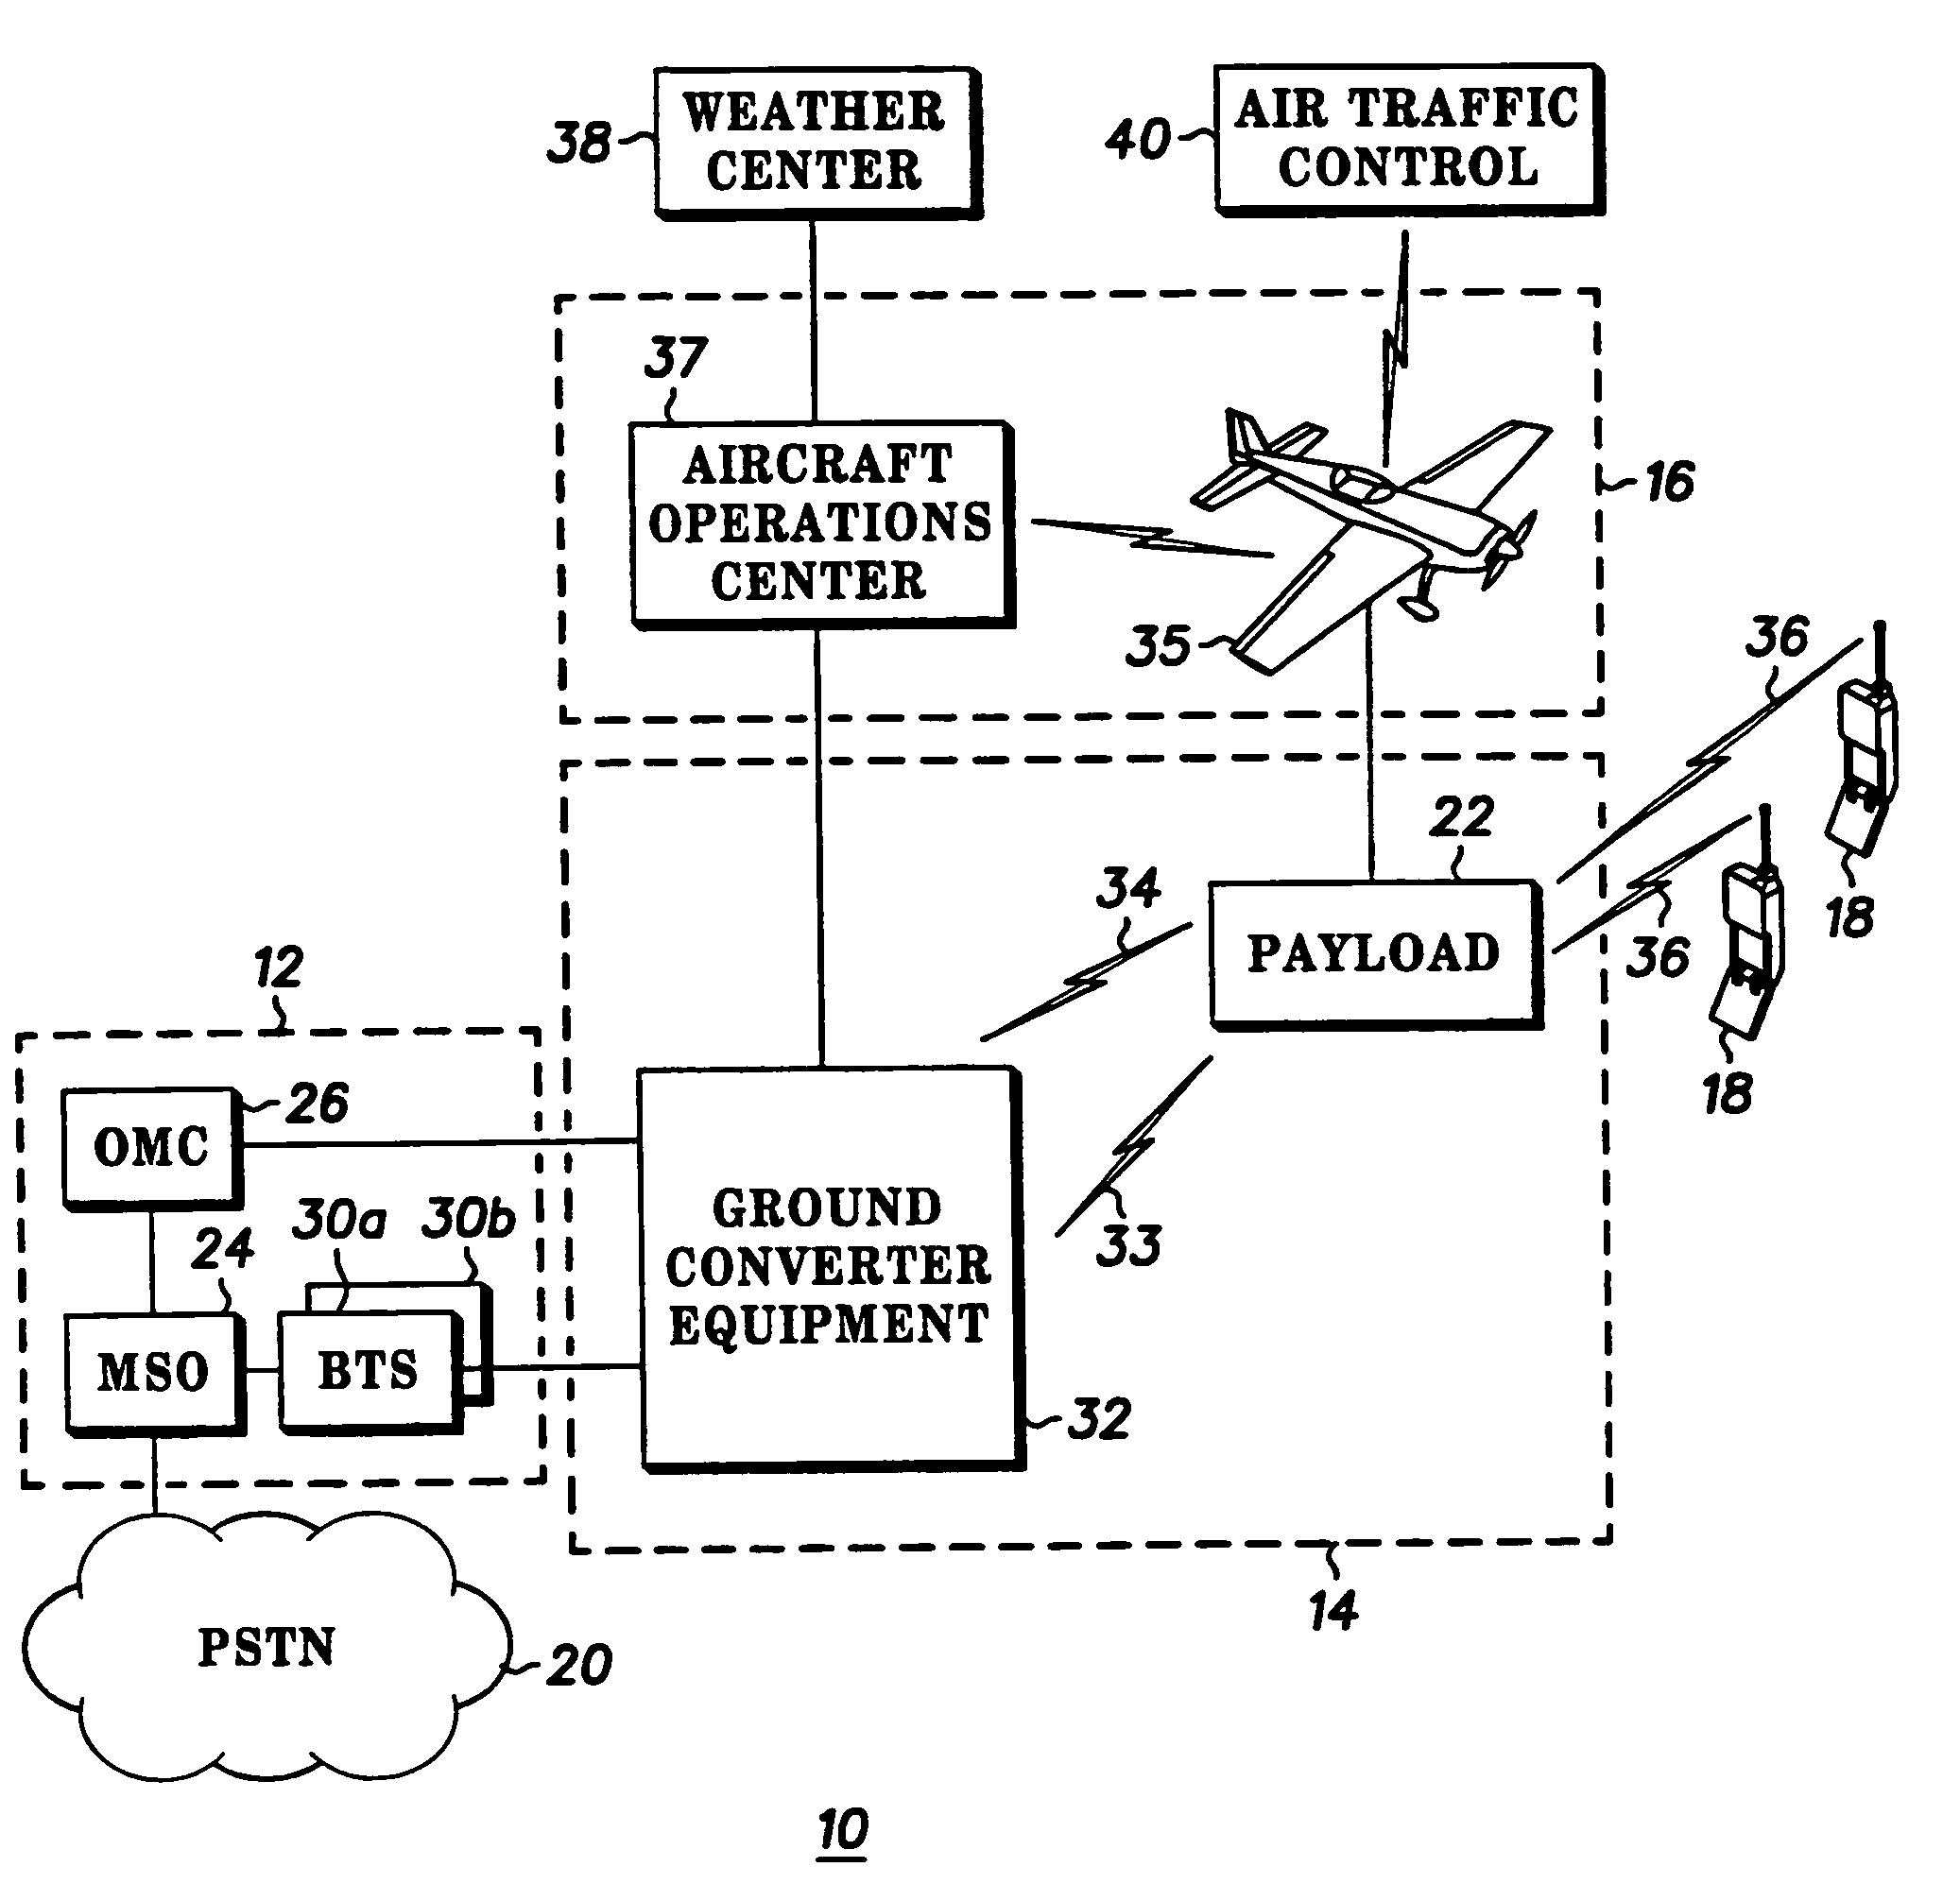 Multi-airplane cellular communications system